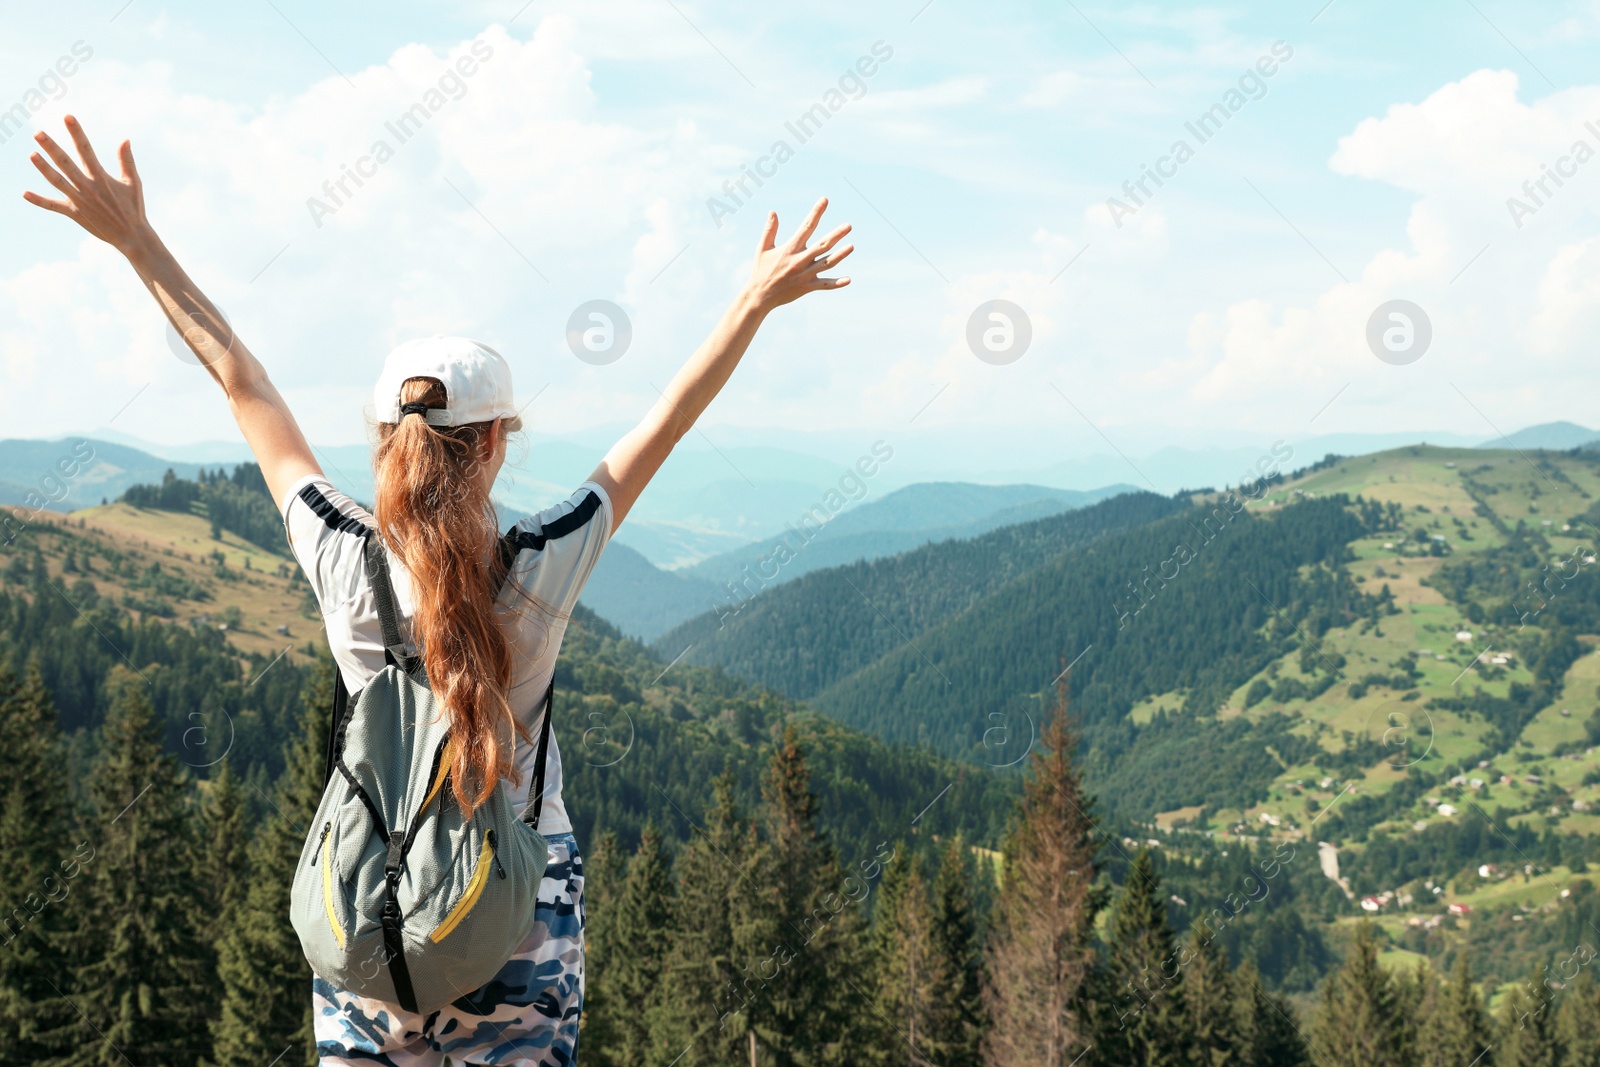 Photo of Woman with backpack in wilderness. Mountain landscape